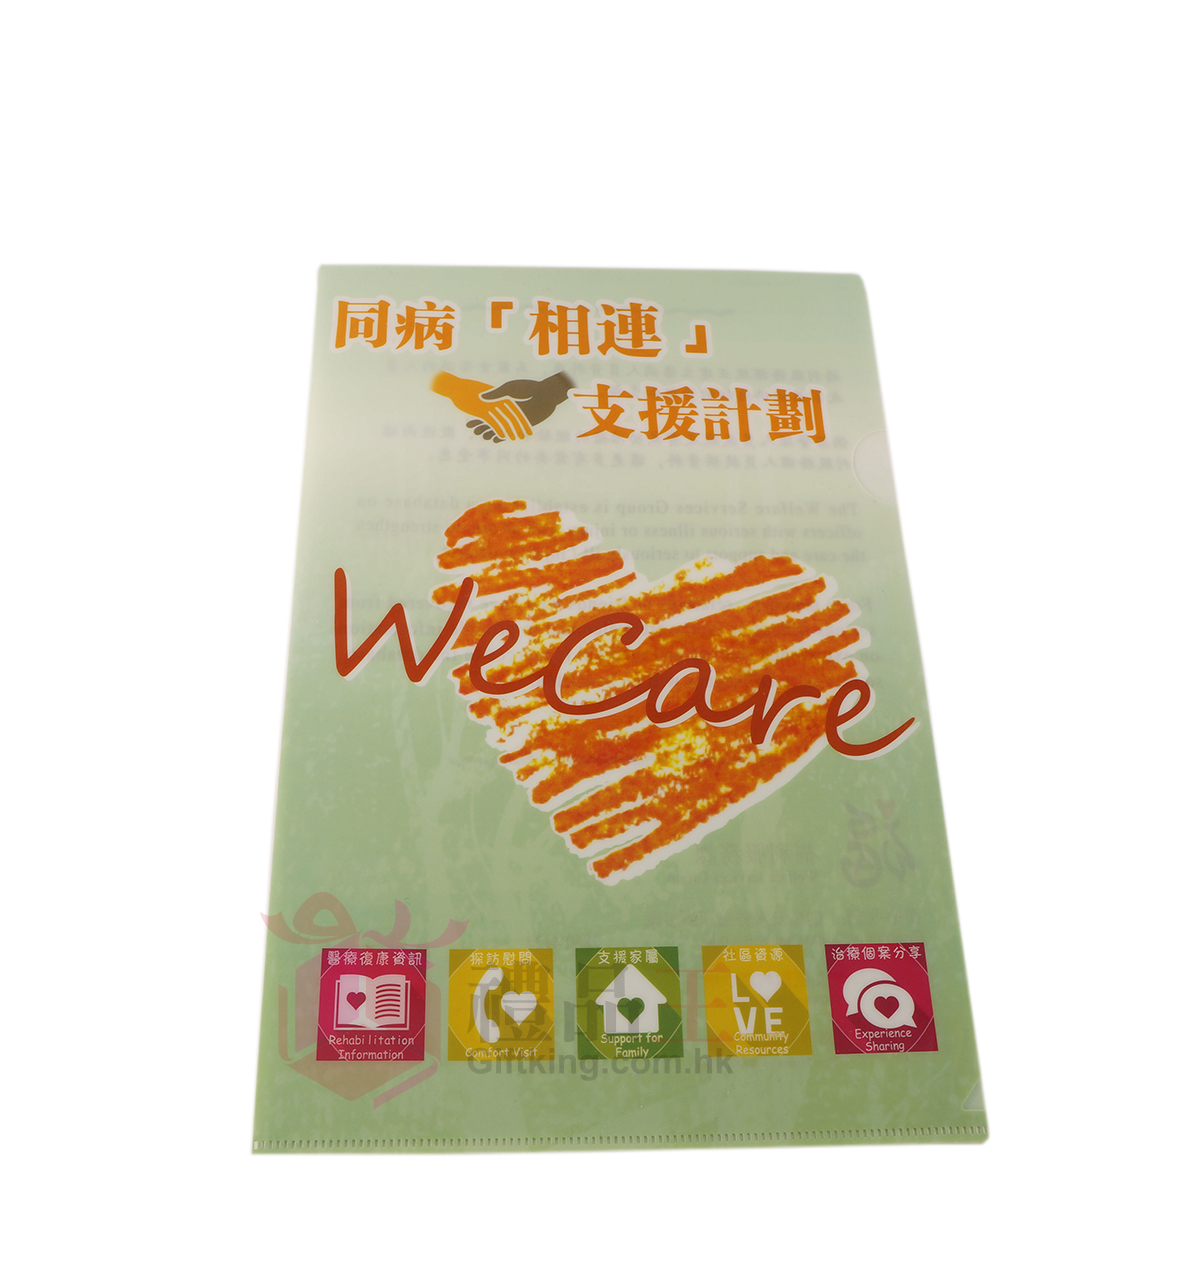 Hong Kong Police Force WeCare A4 File (Stationery Gift)